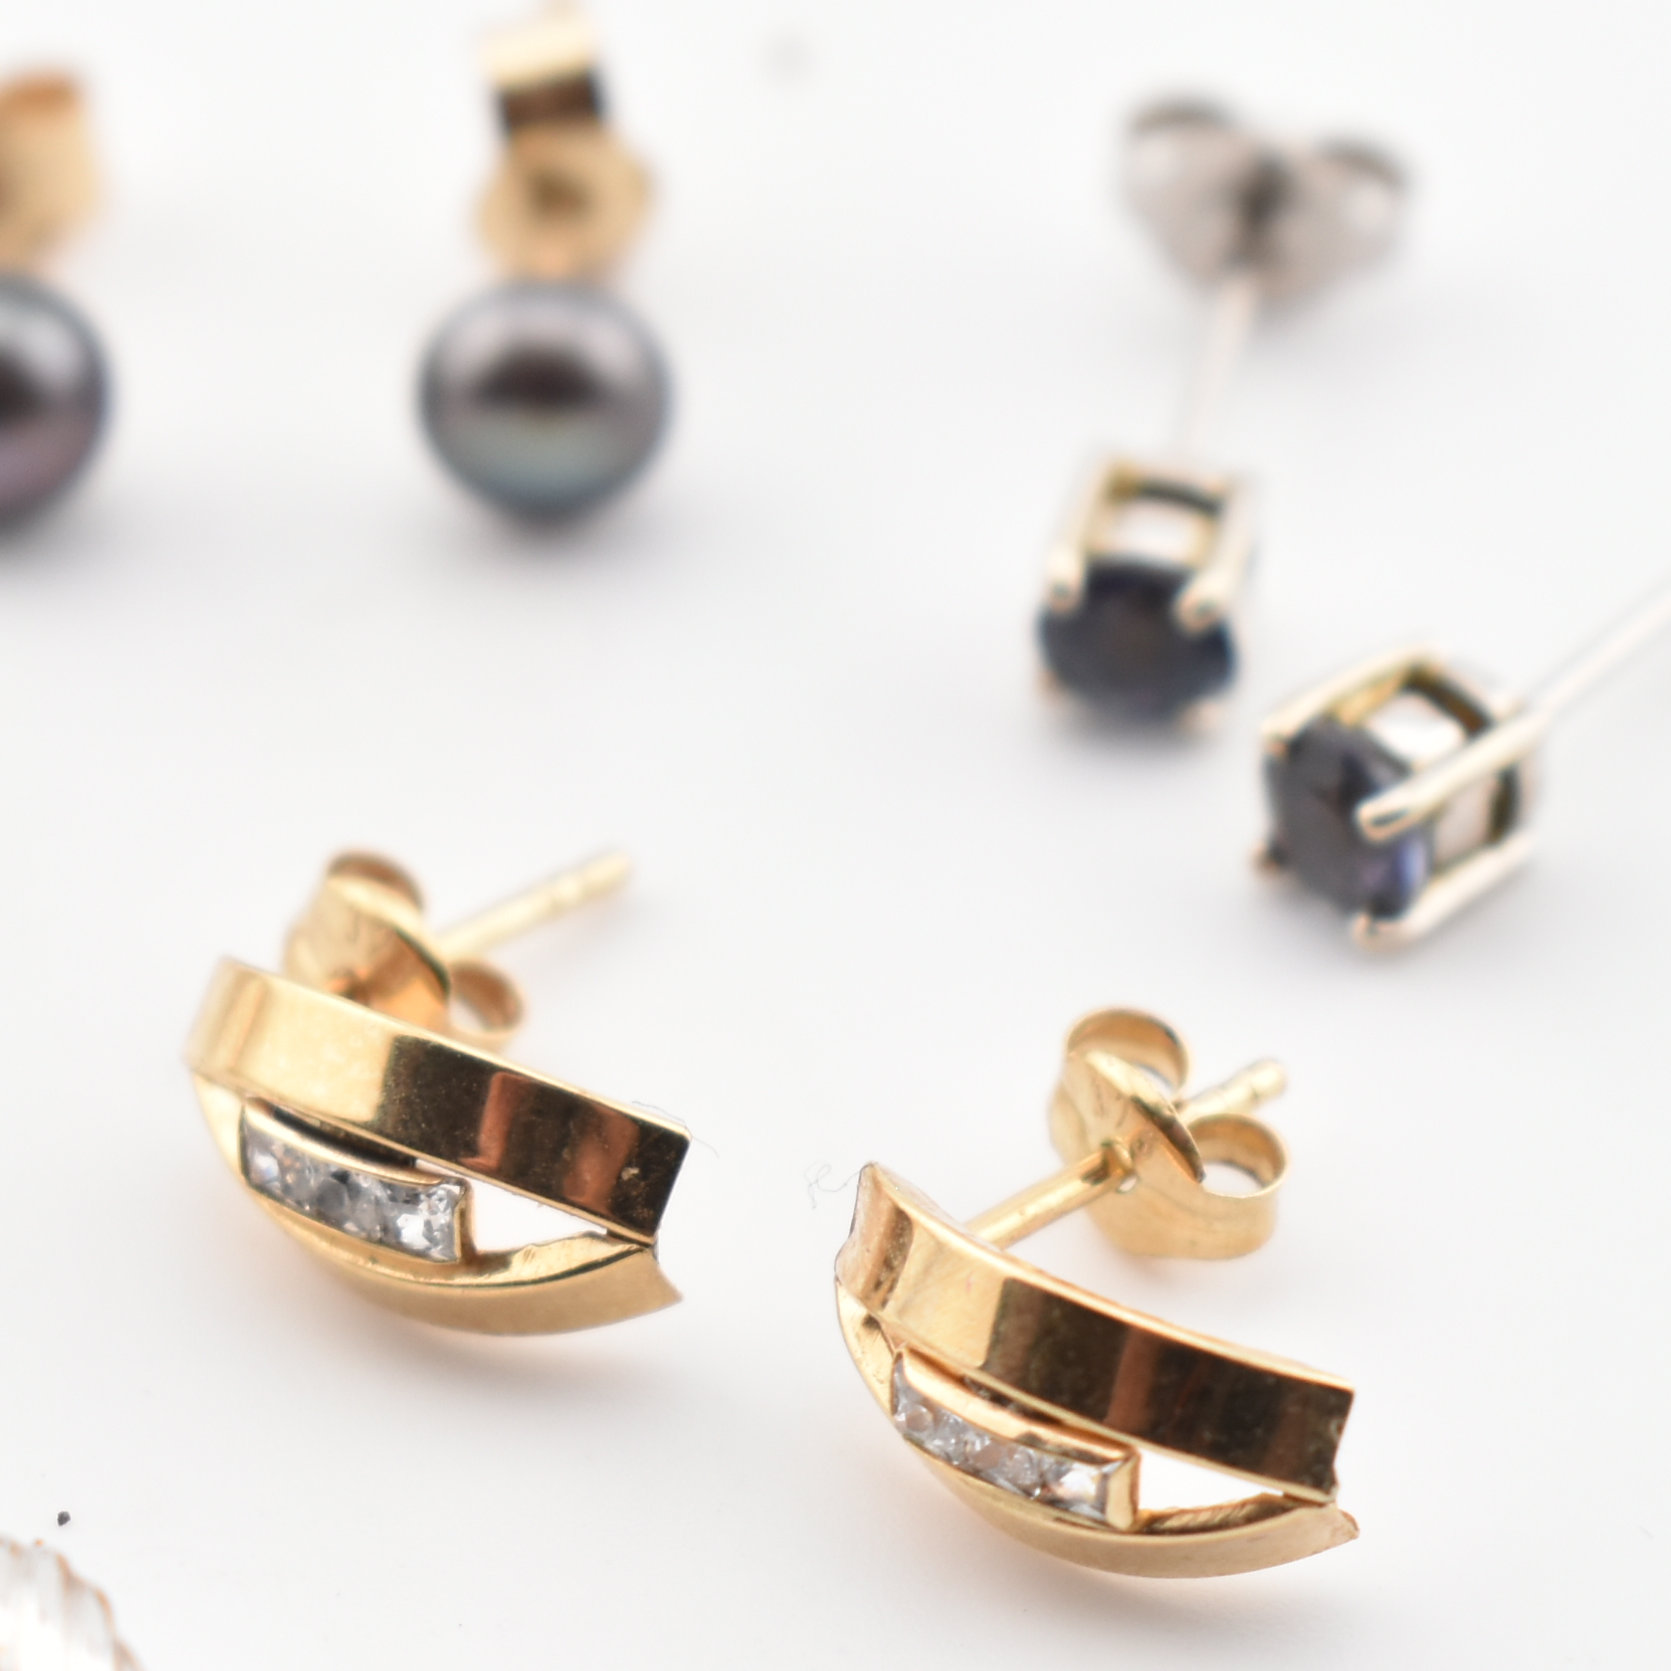 COLLECTION OF 9CT GOLD & GEM SET EARRINGS - Image 3 of 5